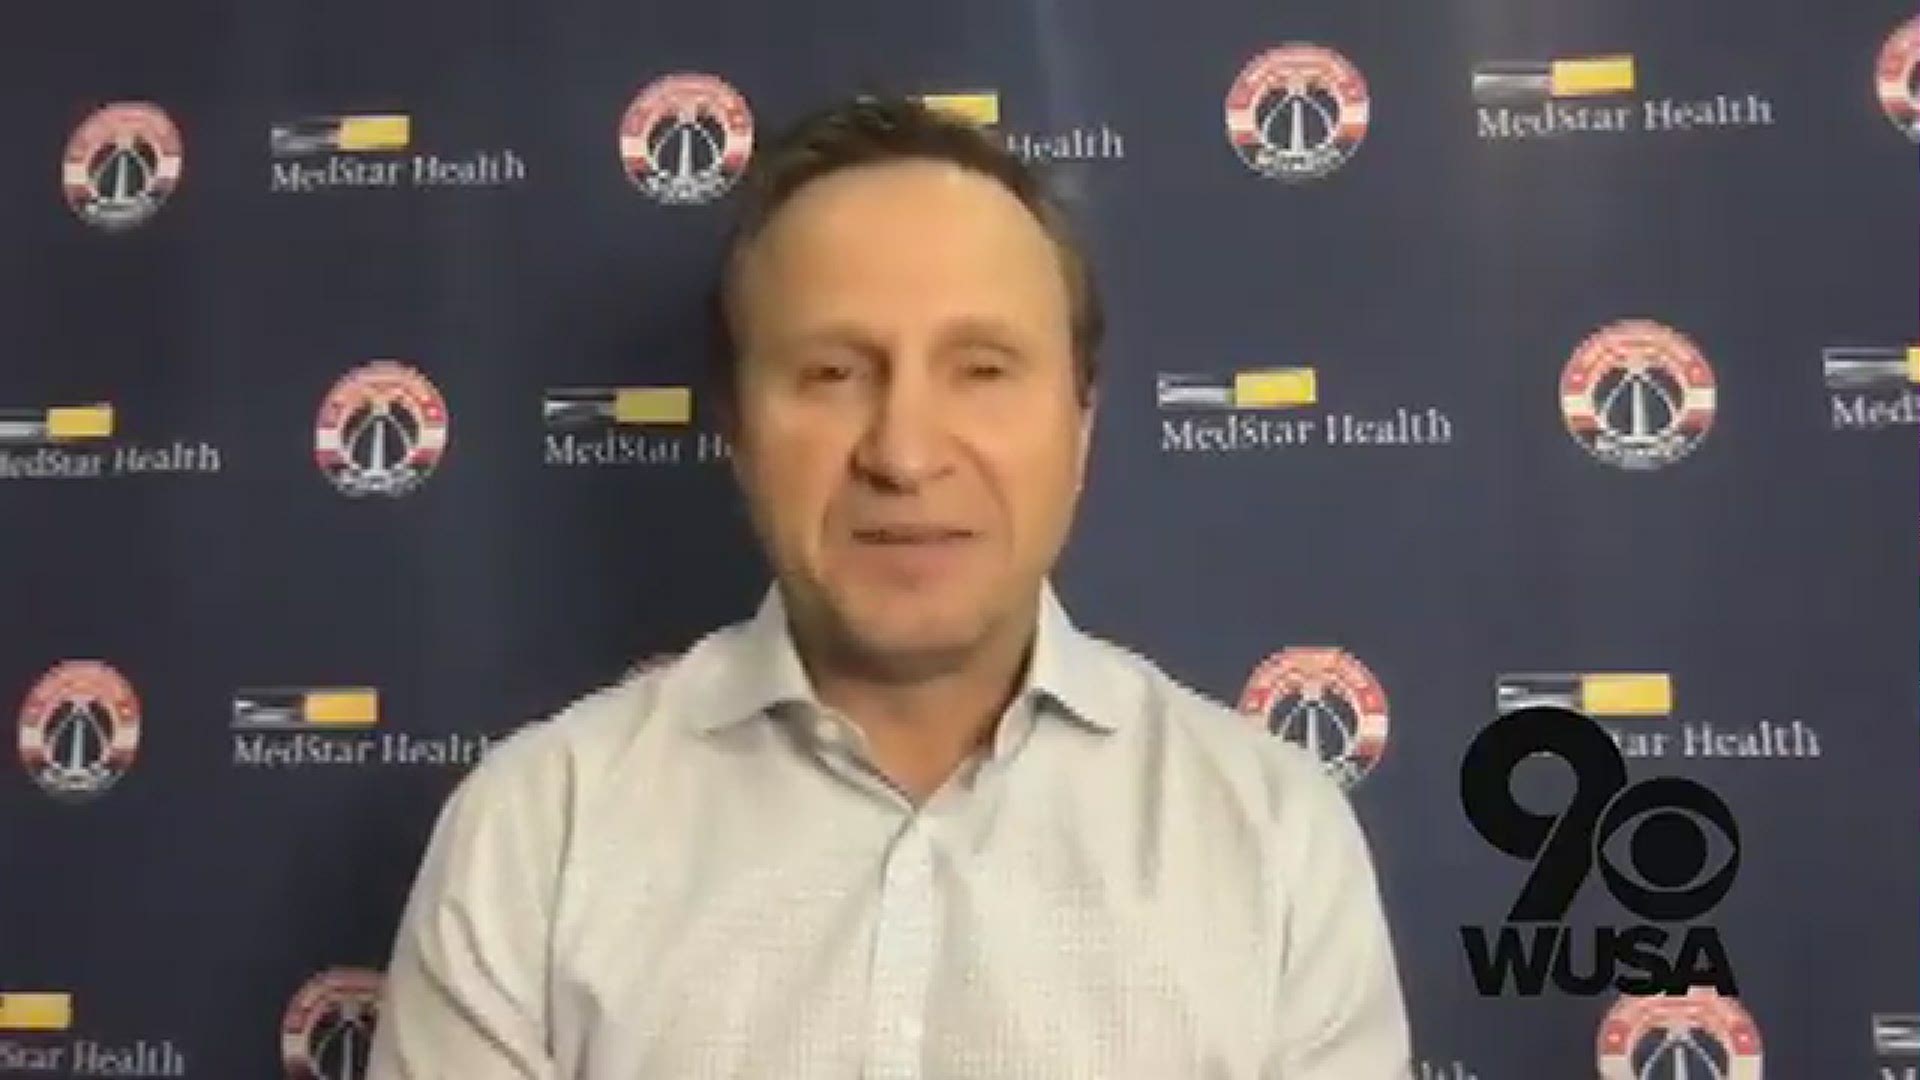 Washington Wizards head coach talks about how much excitement the organization has to be picking Deni Avdija with 9th pick of 2020 NBA Draft.